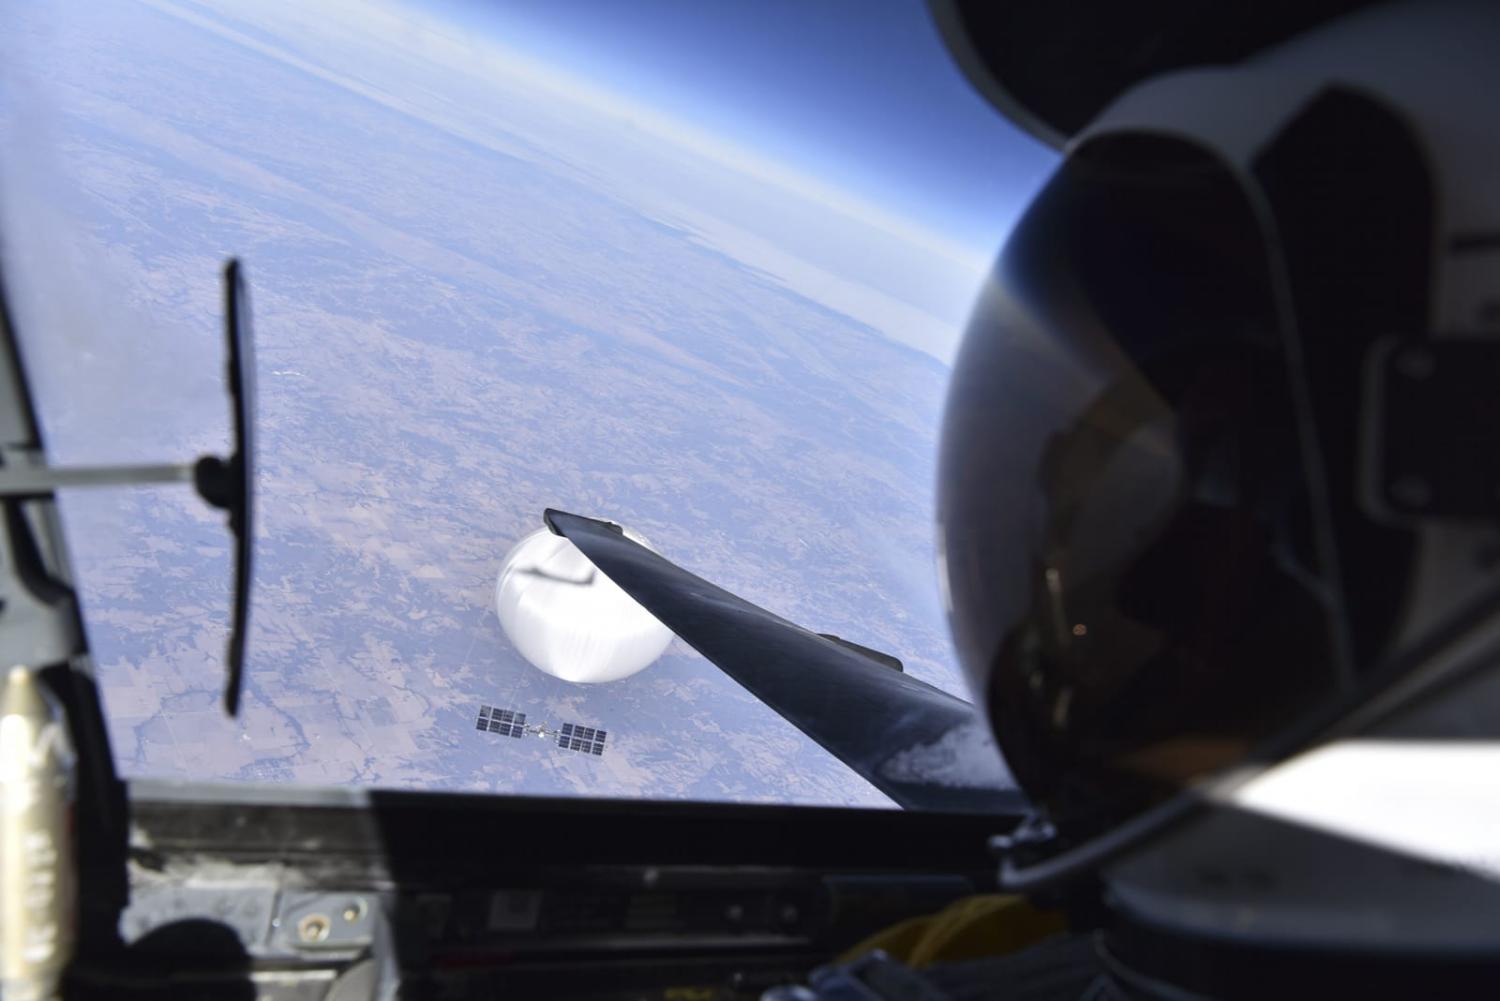 A US Air Force pilot looks down at a suspected Chinese surveillance balloon as it hovered over the central continental United States on 3 February (US Department of Defence via Getty Images)